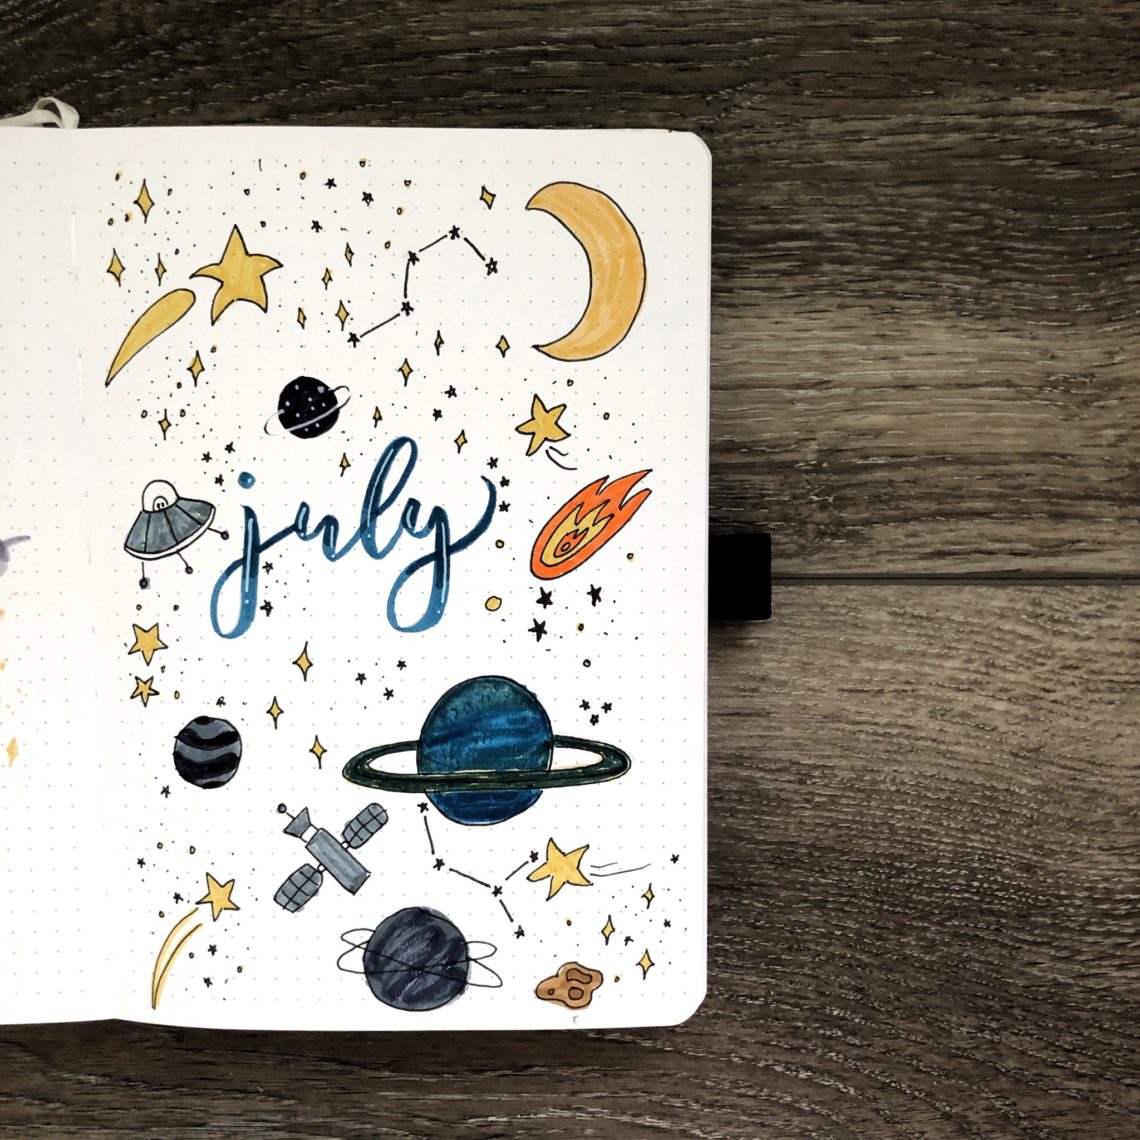 July Bullet Journal | Red, White, and Blue Bujo - Rae's Daily Page